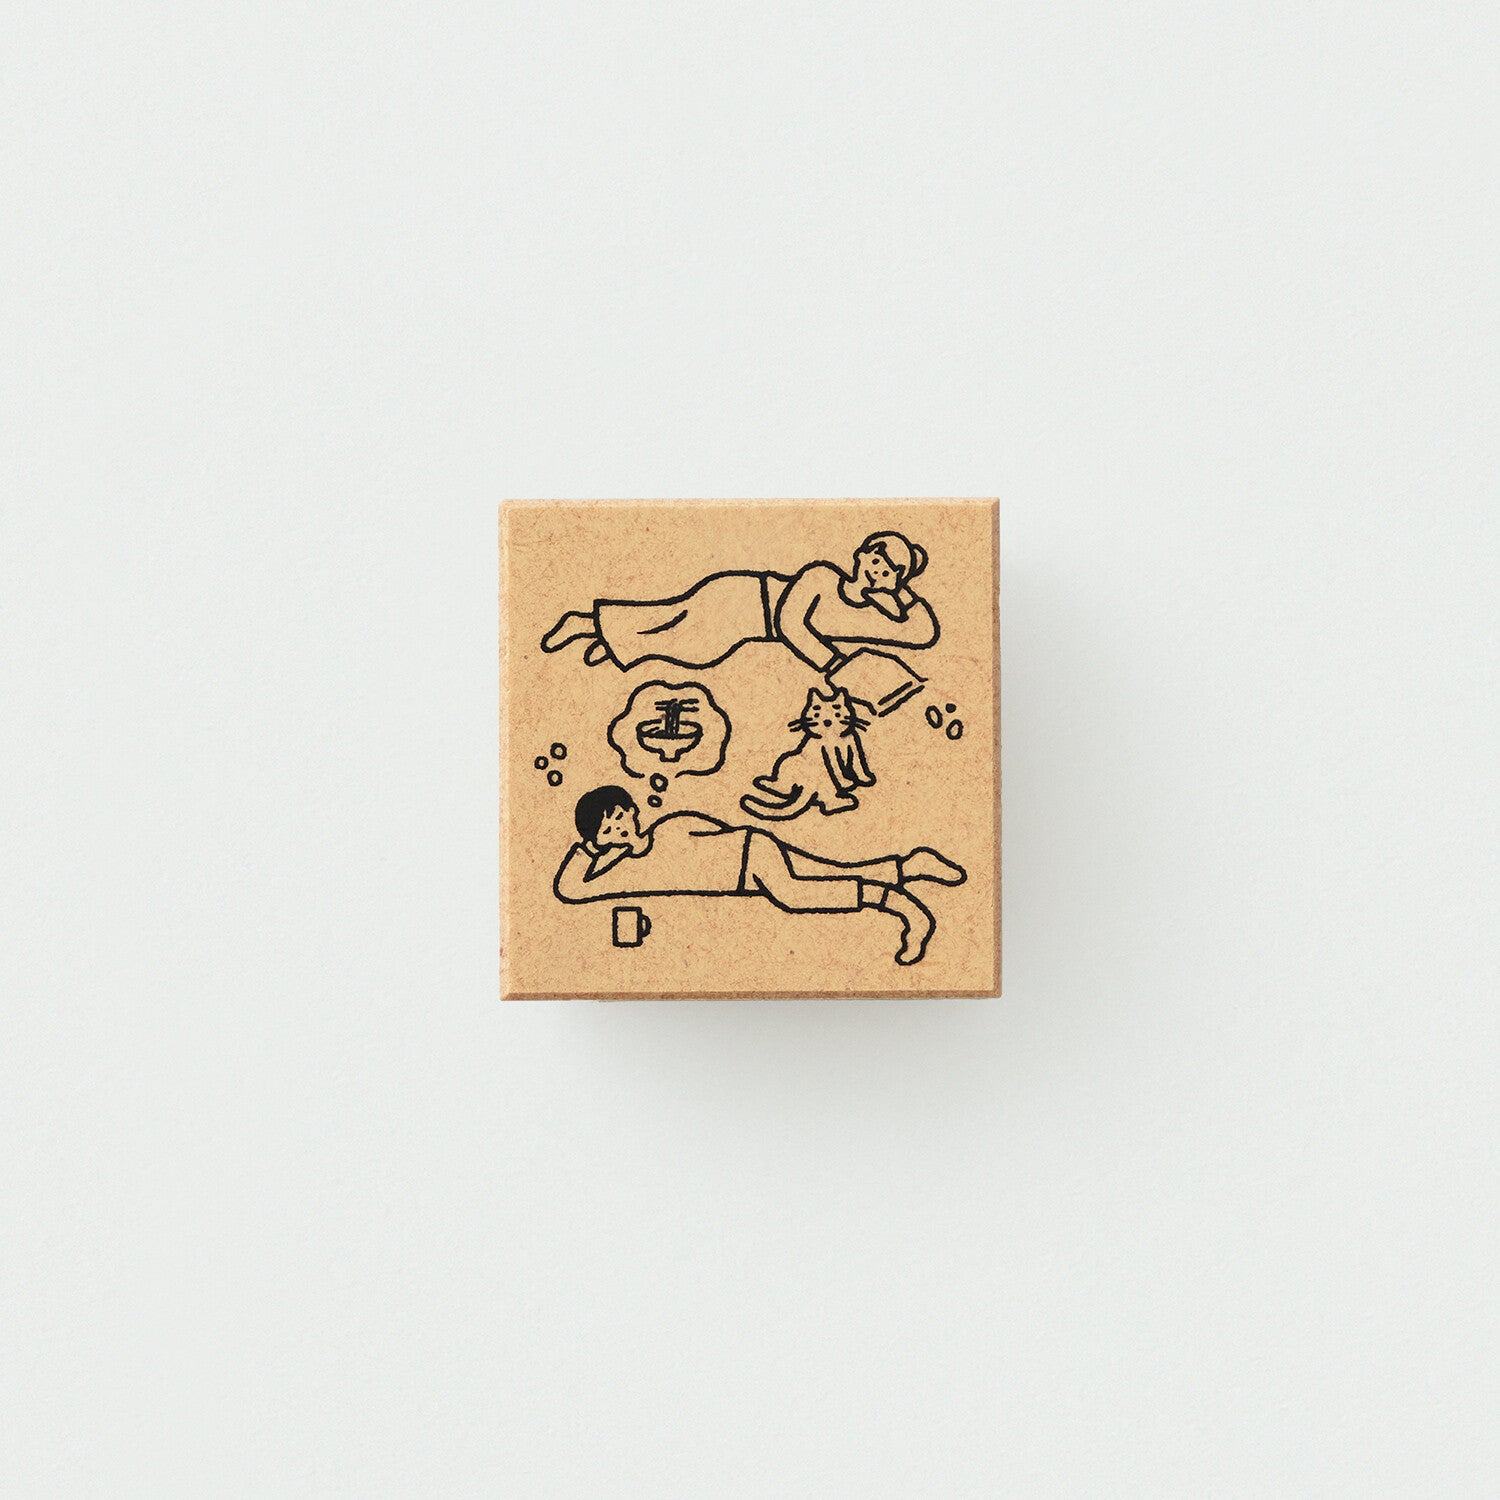 Sankakeru Currently on Vacation Rubber Stamp - Feeling Lazy - Techo Treats